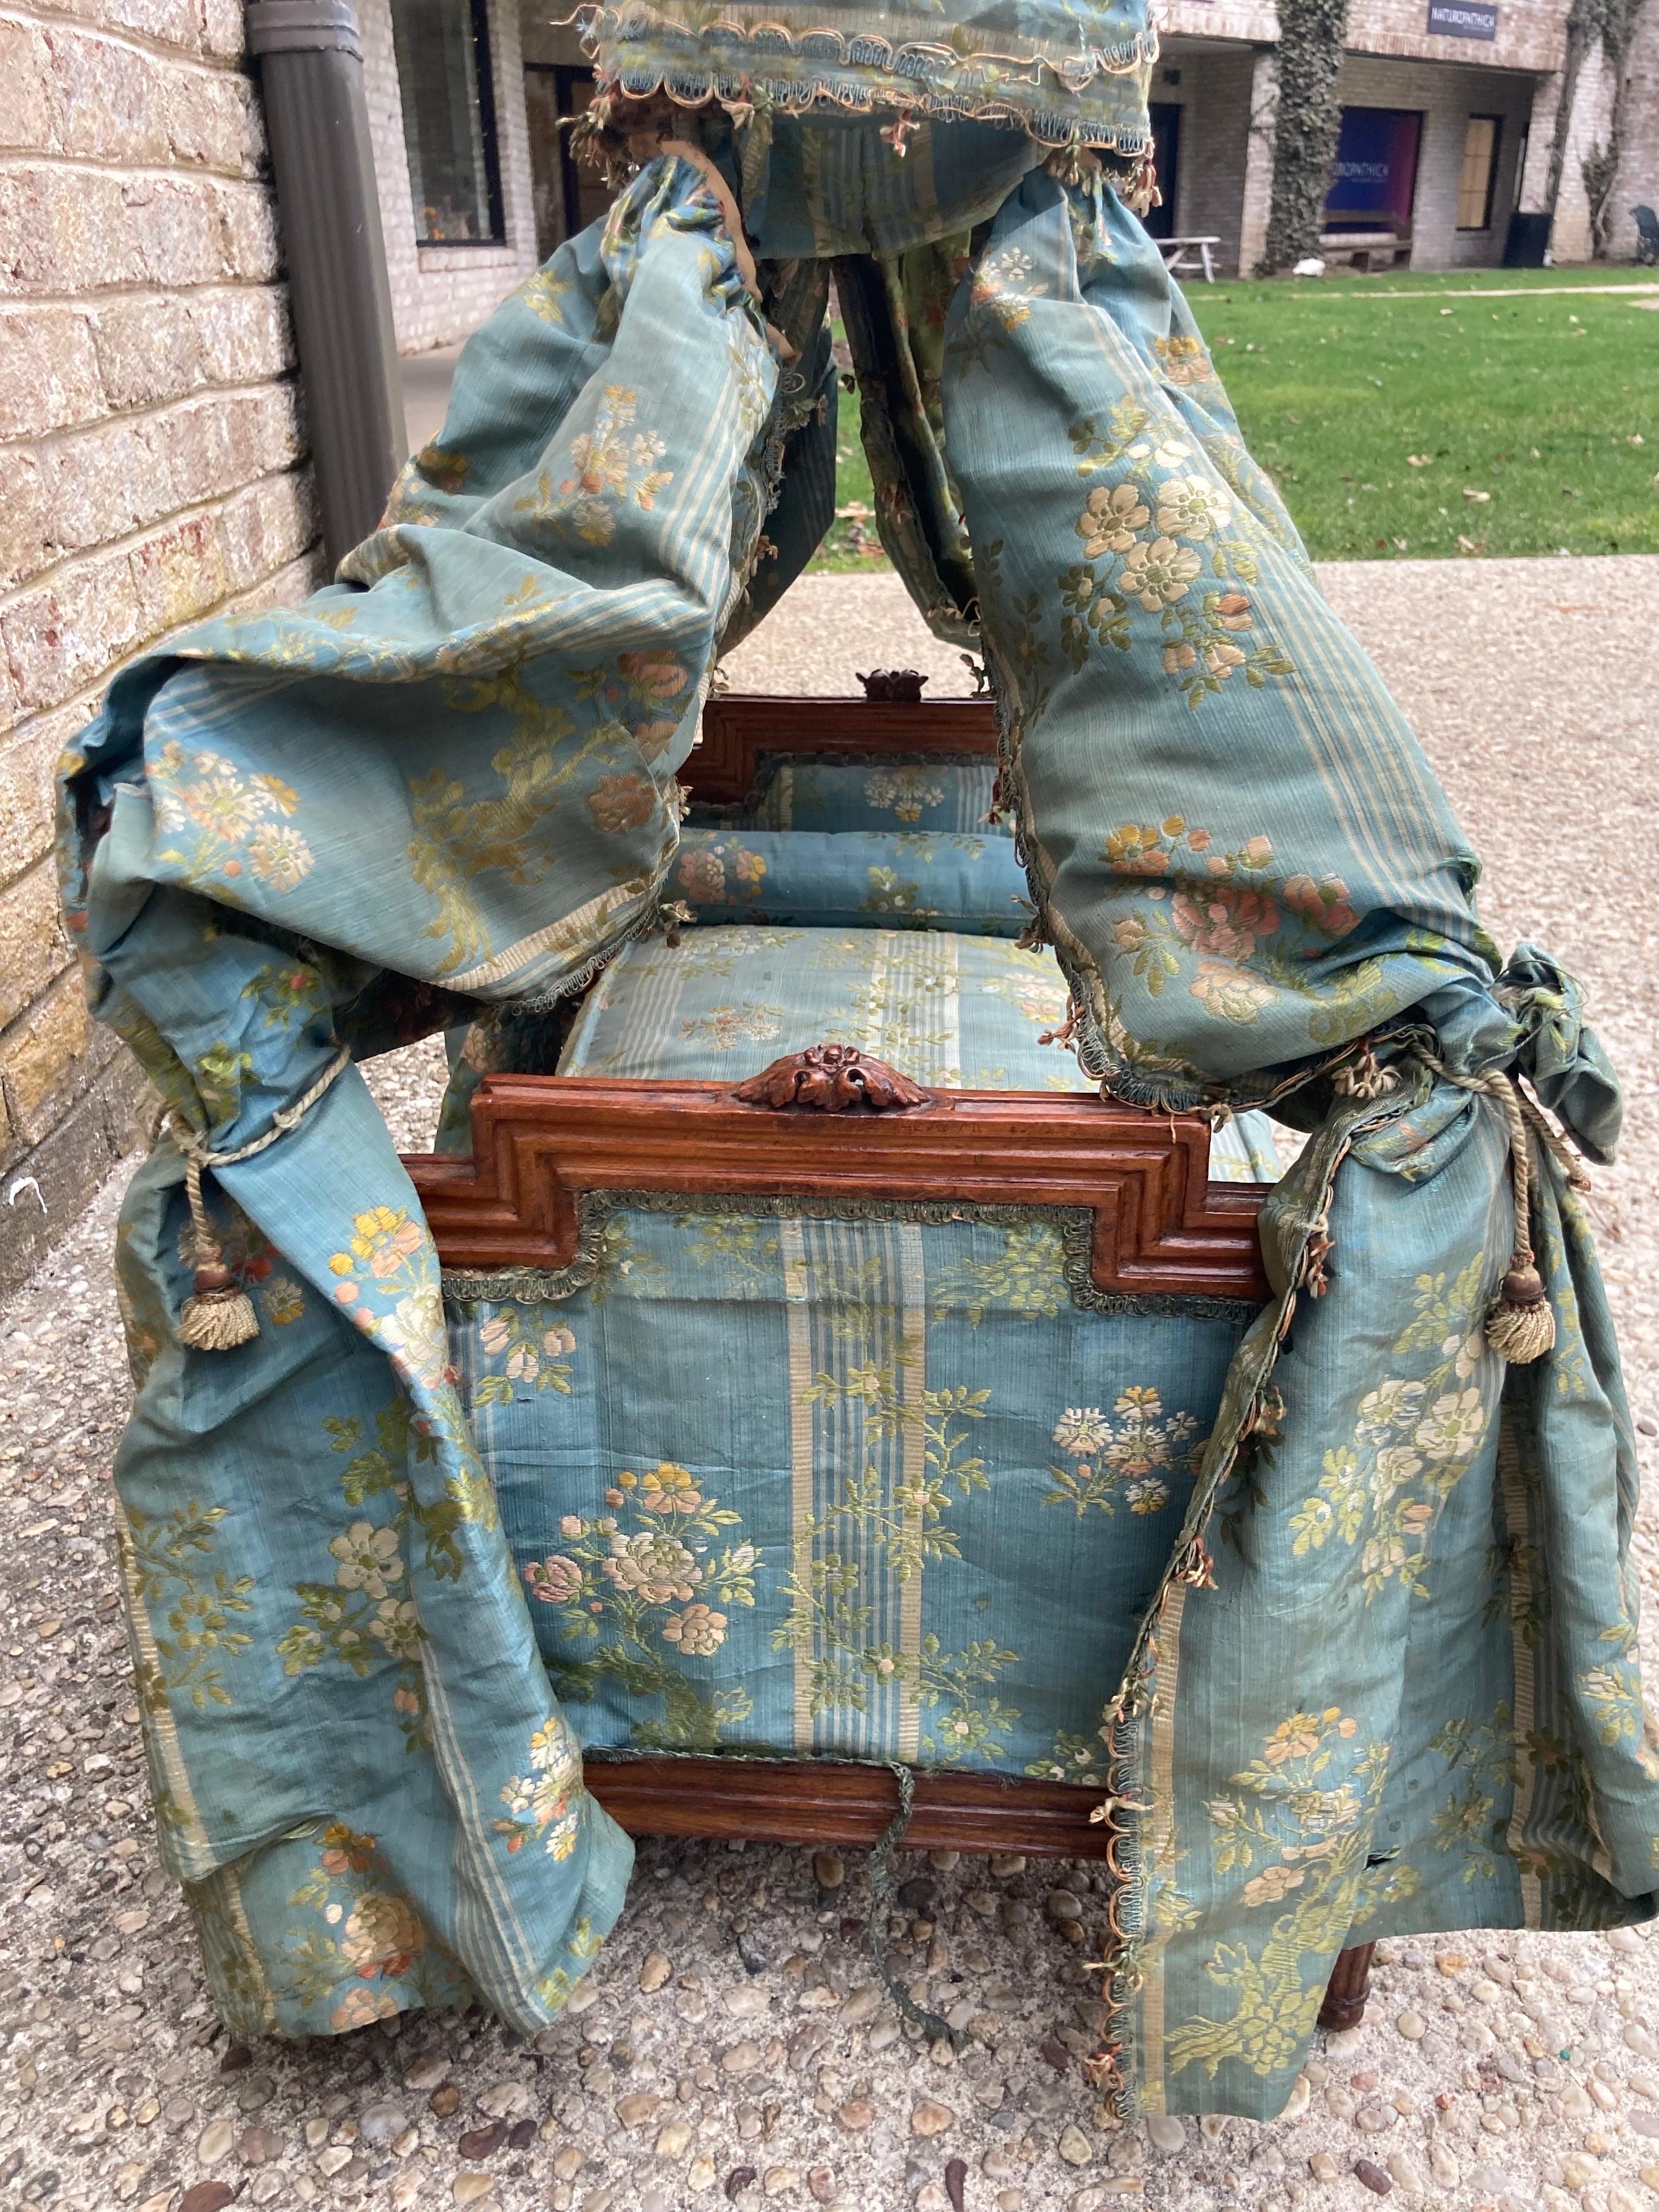 Exquisite pet/ doll bed in the Louis XXI style. all original silk brocade drapery and upholstery. and remnants of trims. mattress is stuffed horsehair. ostrich feather floret. (the height of 32